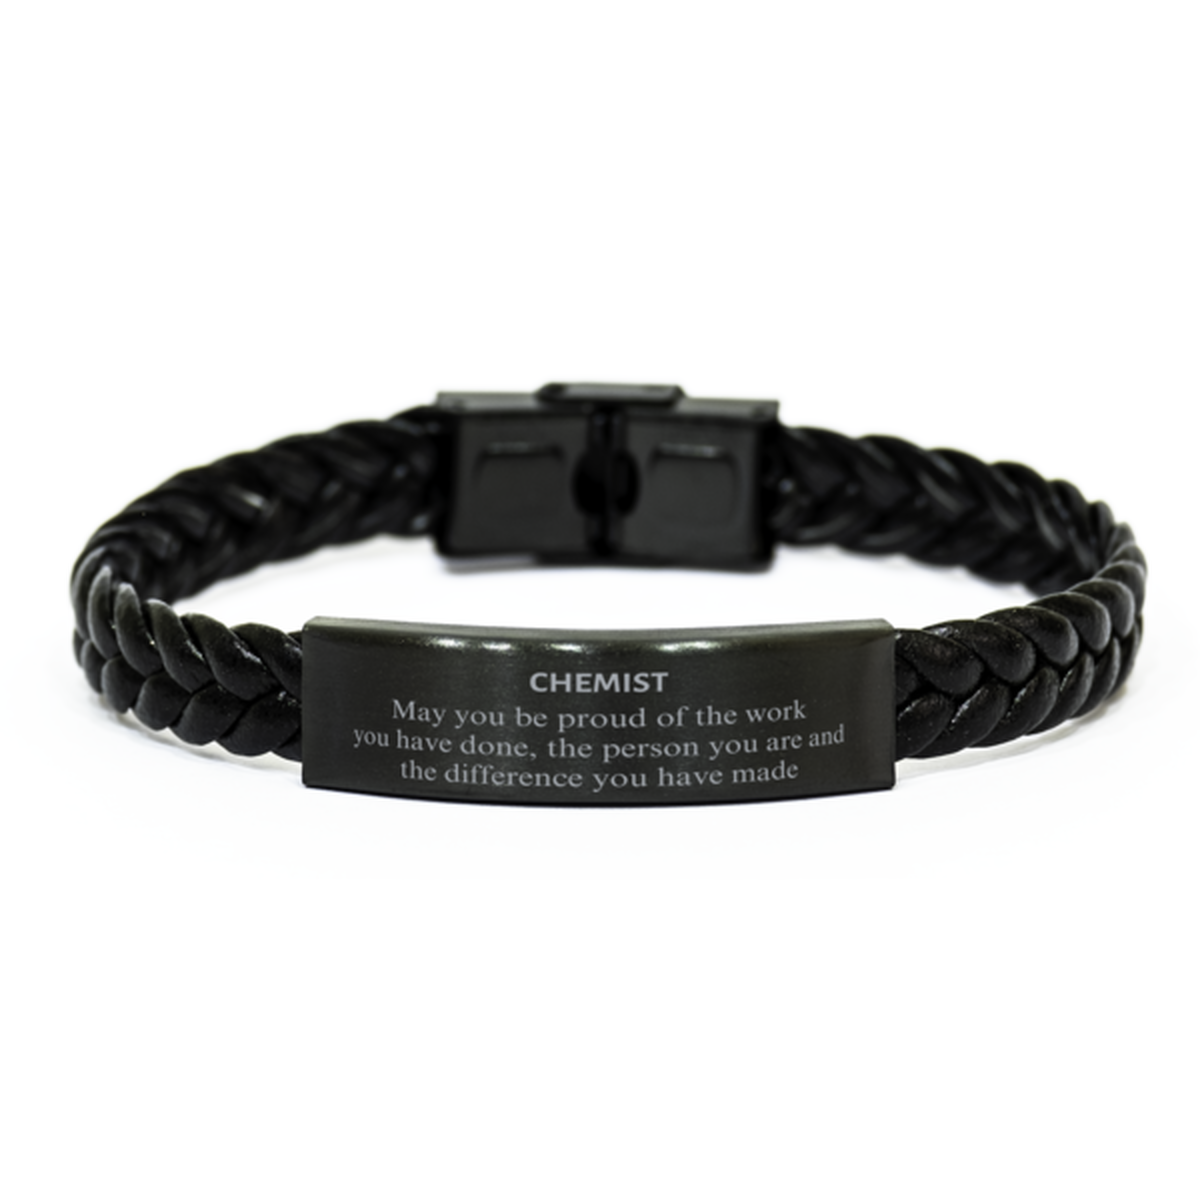 Chemist May you be proud of the work you have done, Retirement Chemist Braided Leather Bracelet for Colleague Appreciation Gifts Amazing for Chemist